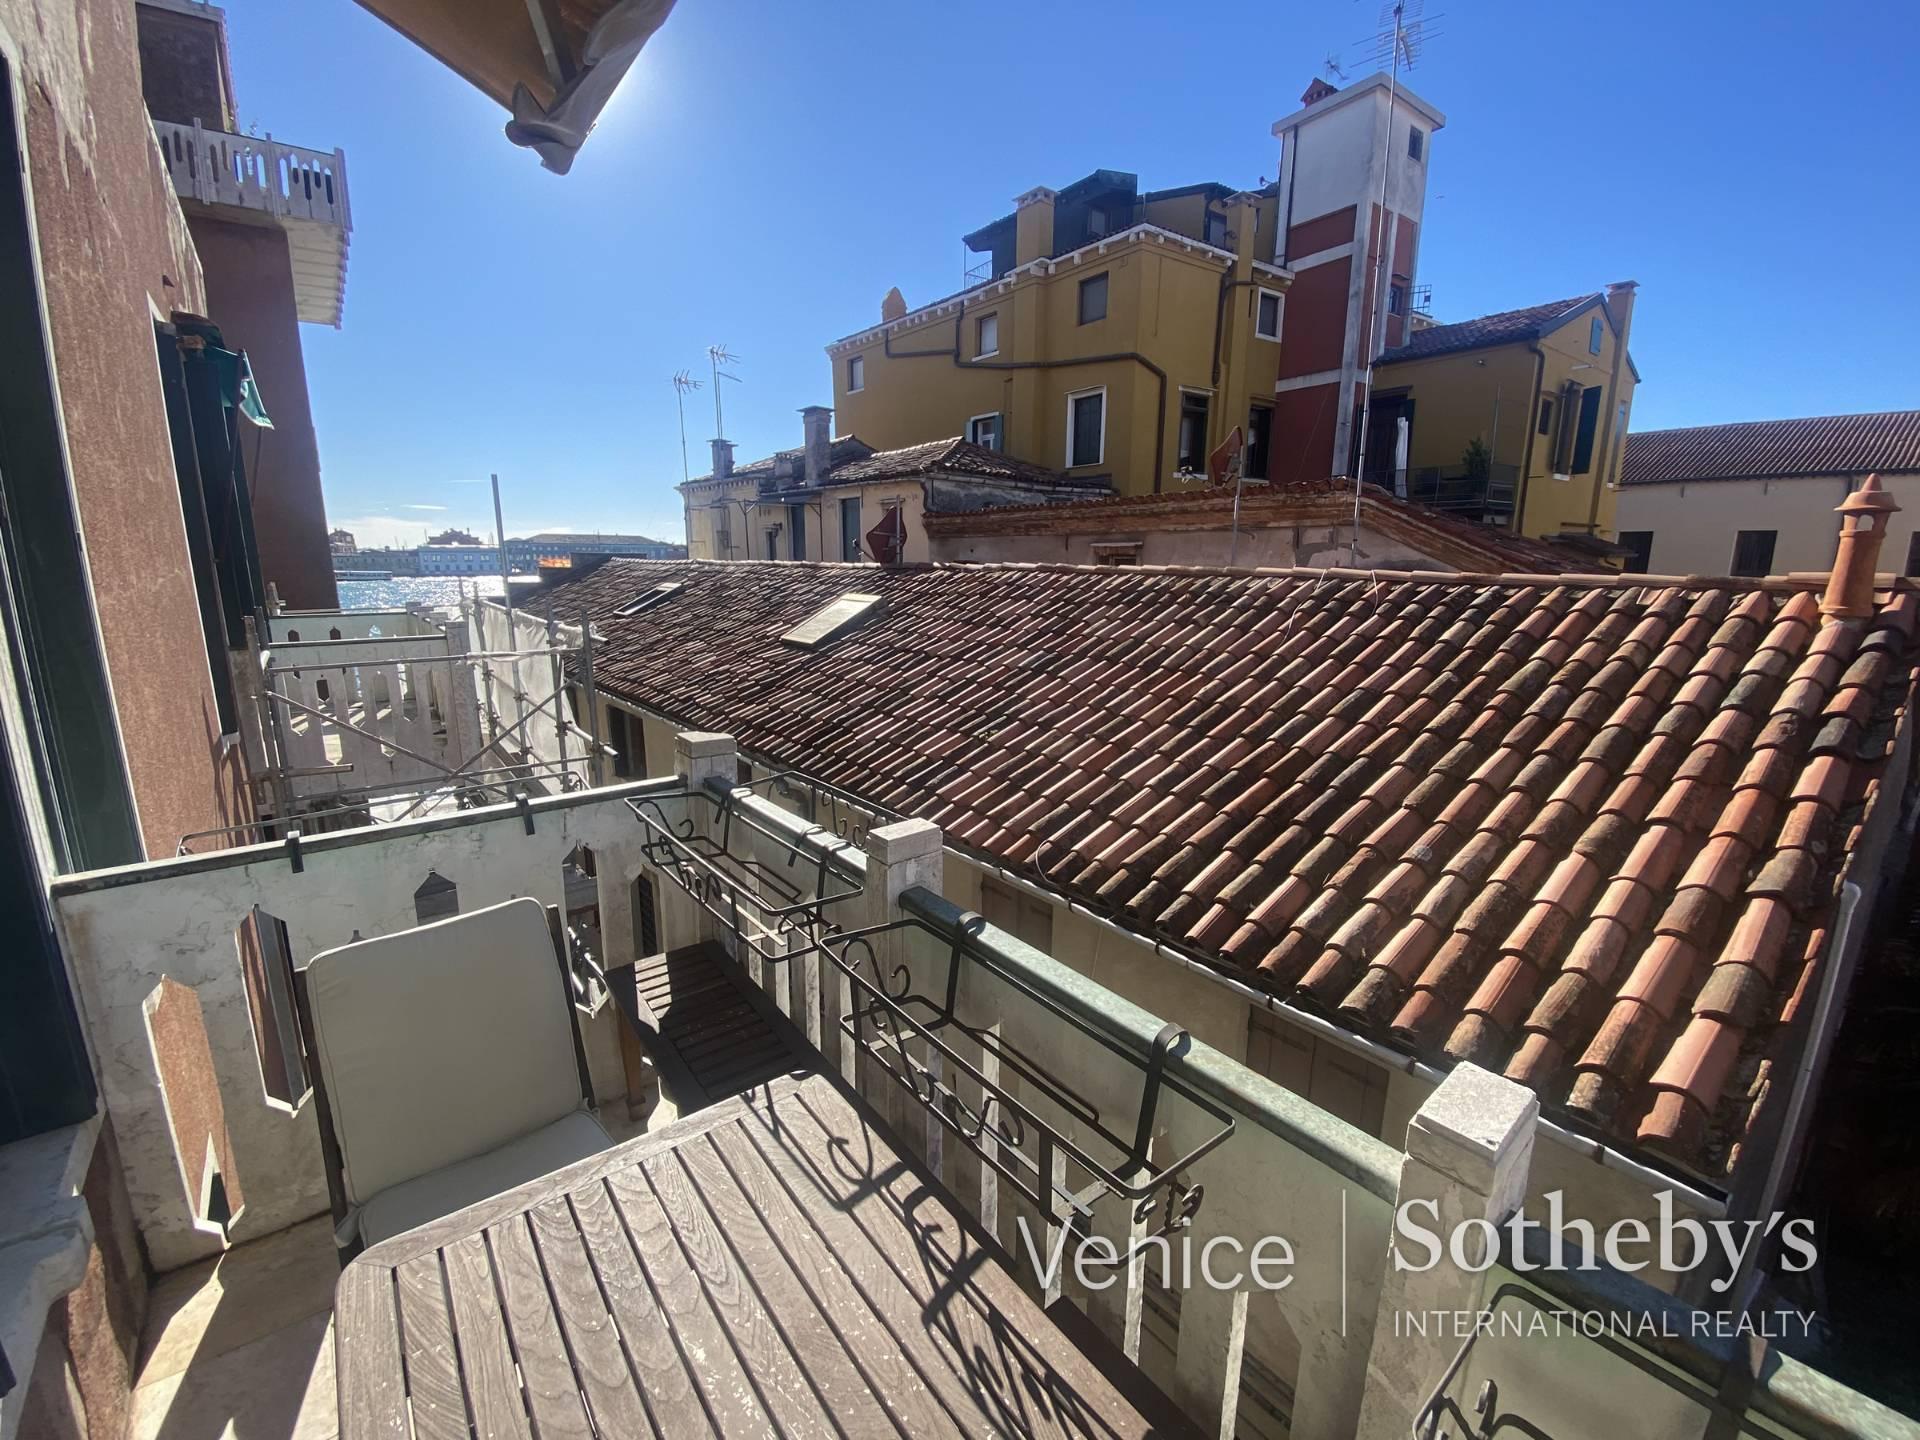 Two very light adjoining properties with airy balconies and mesmerising side views of the Giudecca canal - 2